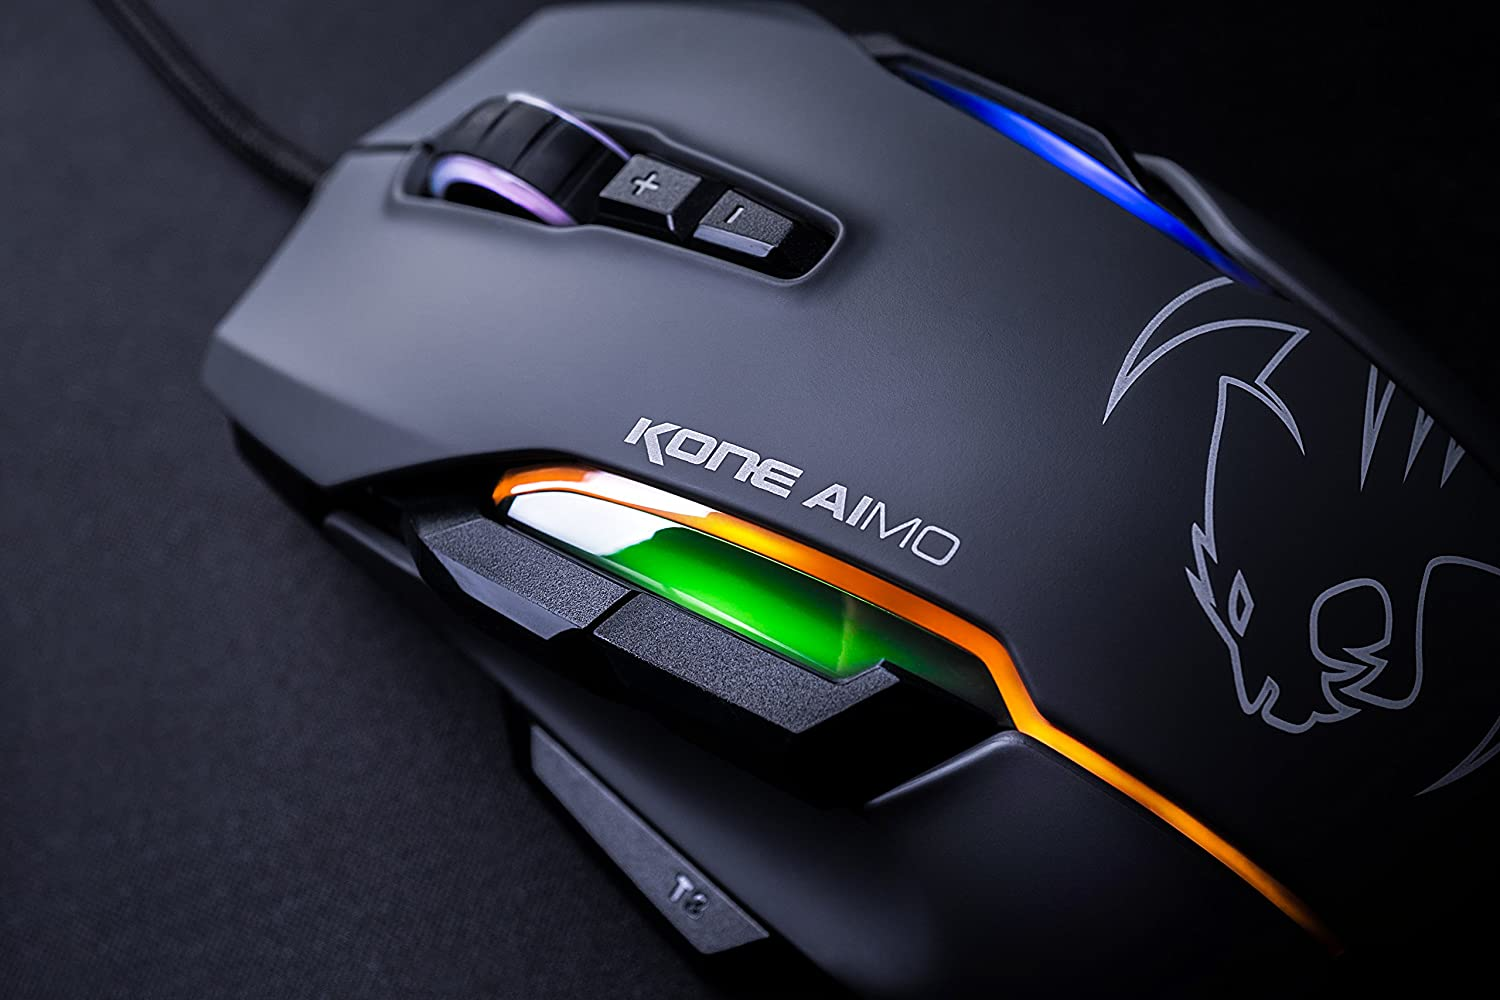 Ao80Ebpr Roccat Https://Youtu.be/Mfk3Bmiiu8C Roccat® Swarm Powered – Comprehensive Driver Suite With A Striking Design And A Stunning Feature Set, The Kone Aimo Channels The Legacy Of Its Predecessor. It Boasts Refined Ergonomics With Enhanced Button Distinction, But What Truly Sets It Apart Is Its Rgba Double Lightguides Powered By The State-Of-The-Art Aimo Intelligent Lighting System. Aimo Is The Vivid Illumination Eco-System From Roccat®. Its Functionality Grows Exponentially Based On The Number Of Aimo-Enabled Devices Connected. It Also Reacts Intuitively And Organically To Your Computing Behavior. Eliminating The Need For Configuration, It Presents A State-Of-The-Art Lighting Scenario Right Out Of The Box, For A Completely Fluid, Next-Gen Experience. The Kone Aimo Features A Tri-Button Thumb Zone For A New And Even Greater Level Of Control. It Includes Two Wide Buttons Suitable For All Hand Sizes, Plus An Ergonomic Lower Button Set To Easy-Shift[+]™ By Default. Easy-Shift[+]™ Is The World-Famous Button Duplicator Technology That Lets You Assign A Secondary Function To The Mouse'S Buttons. It'S Easy To Program And Has Options For Simple Commands And Complex Macros. Gaming Mouse Roccat - Kone Aimo Rgba Smart Customization Gaming Mouse (Black) 23 Programmable Keys, Designed In Germany